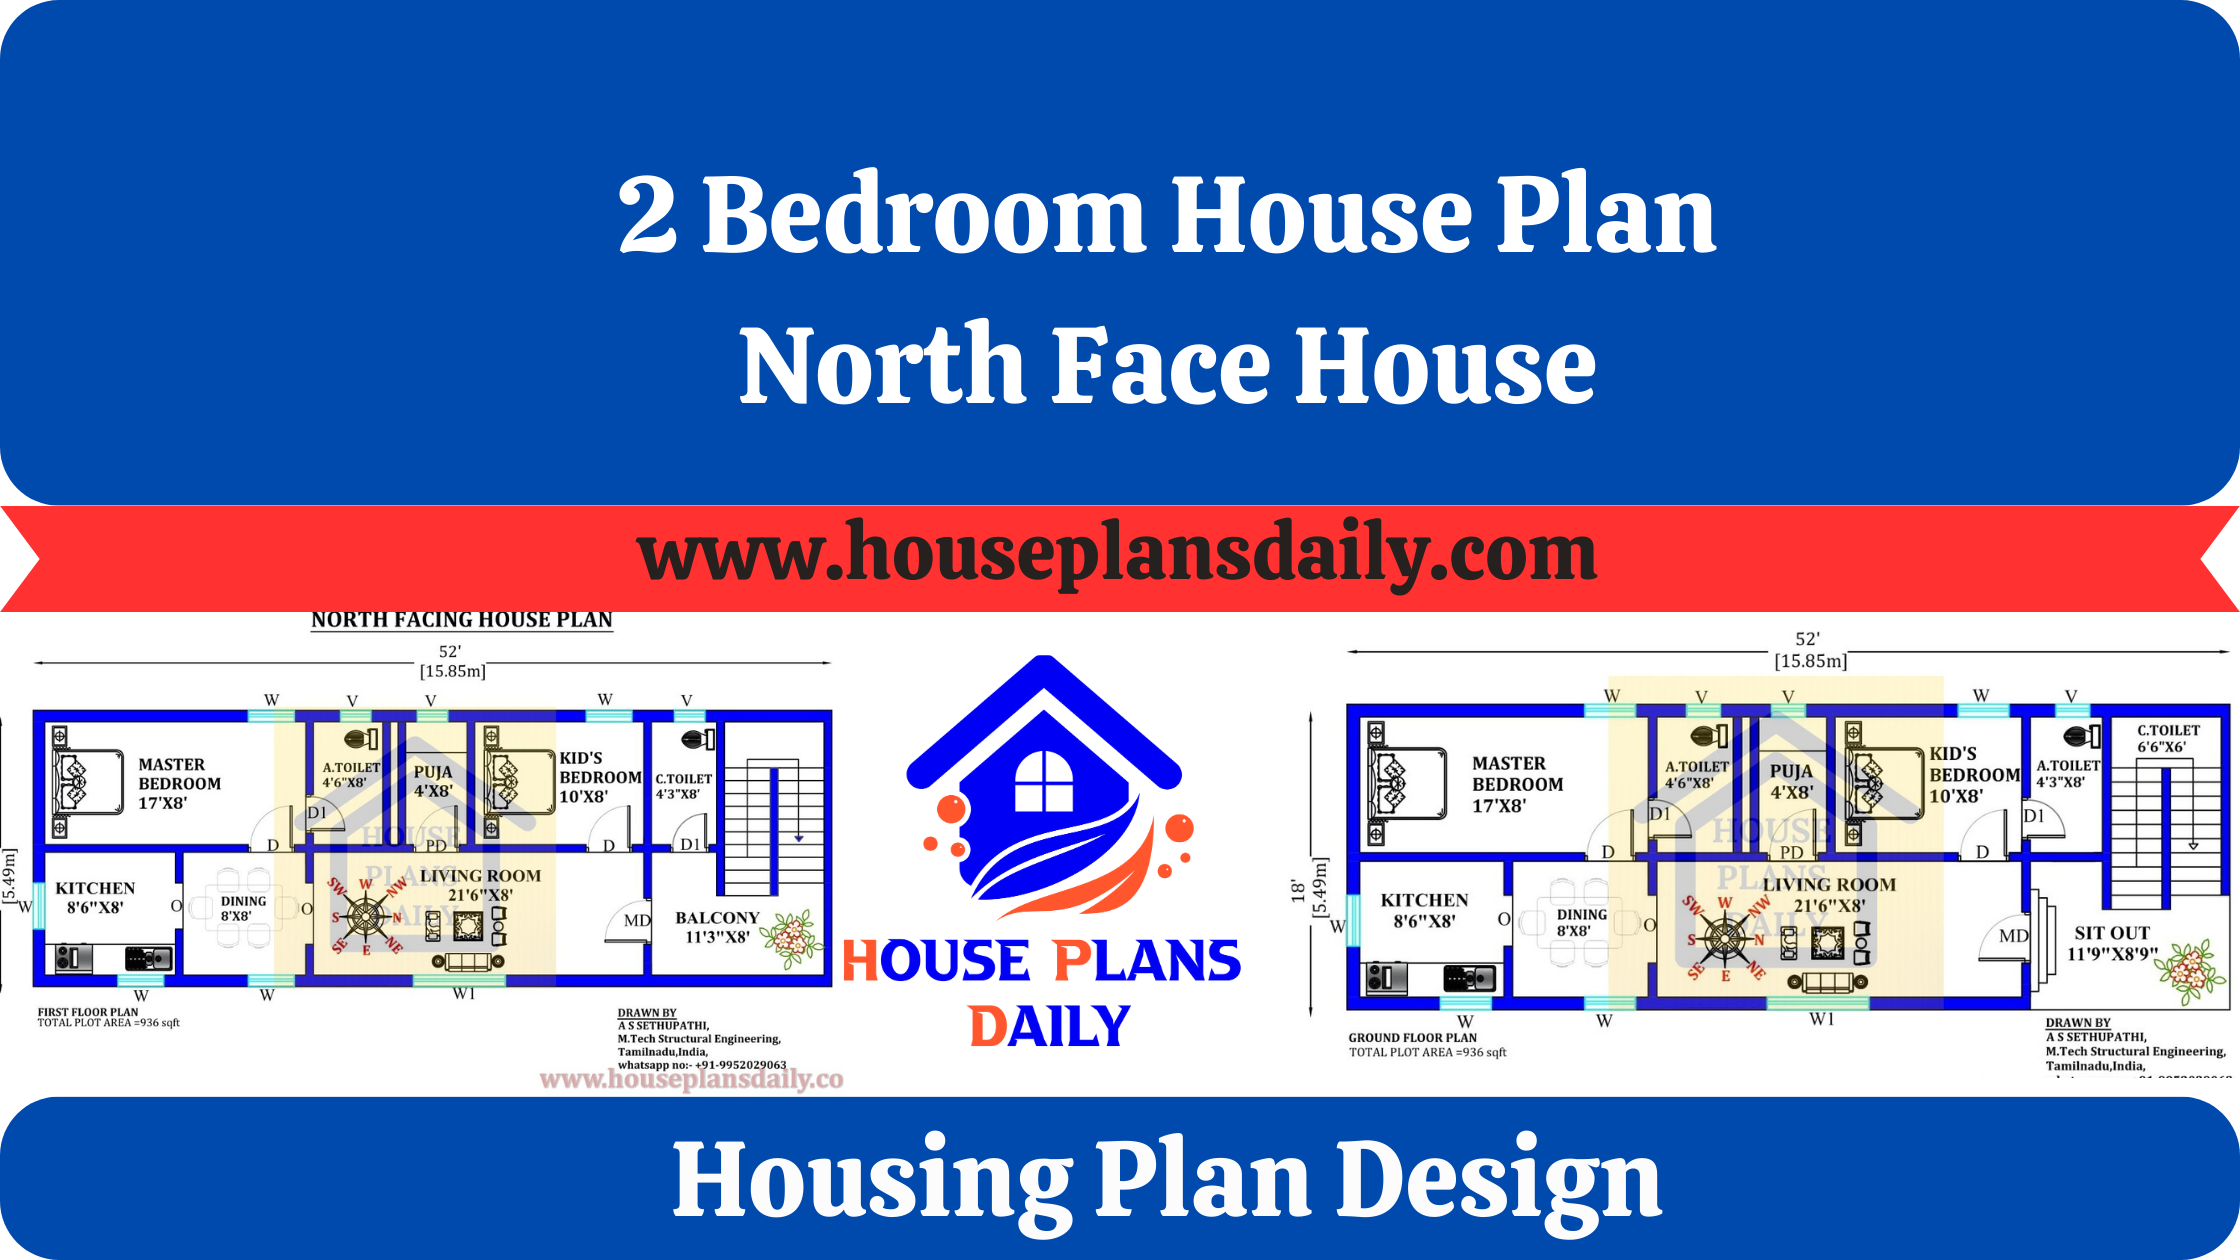 2 Bedroom House Plan | North Face House | Housing Plan Design